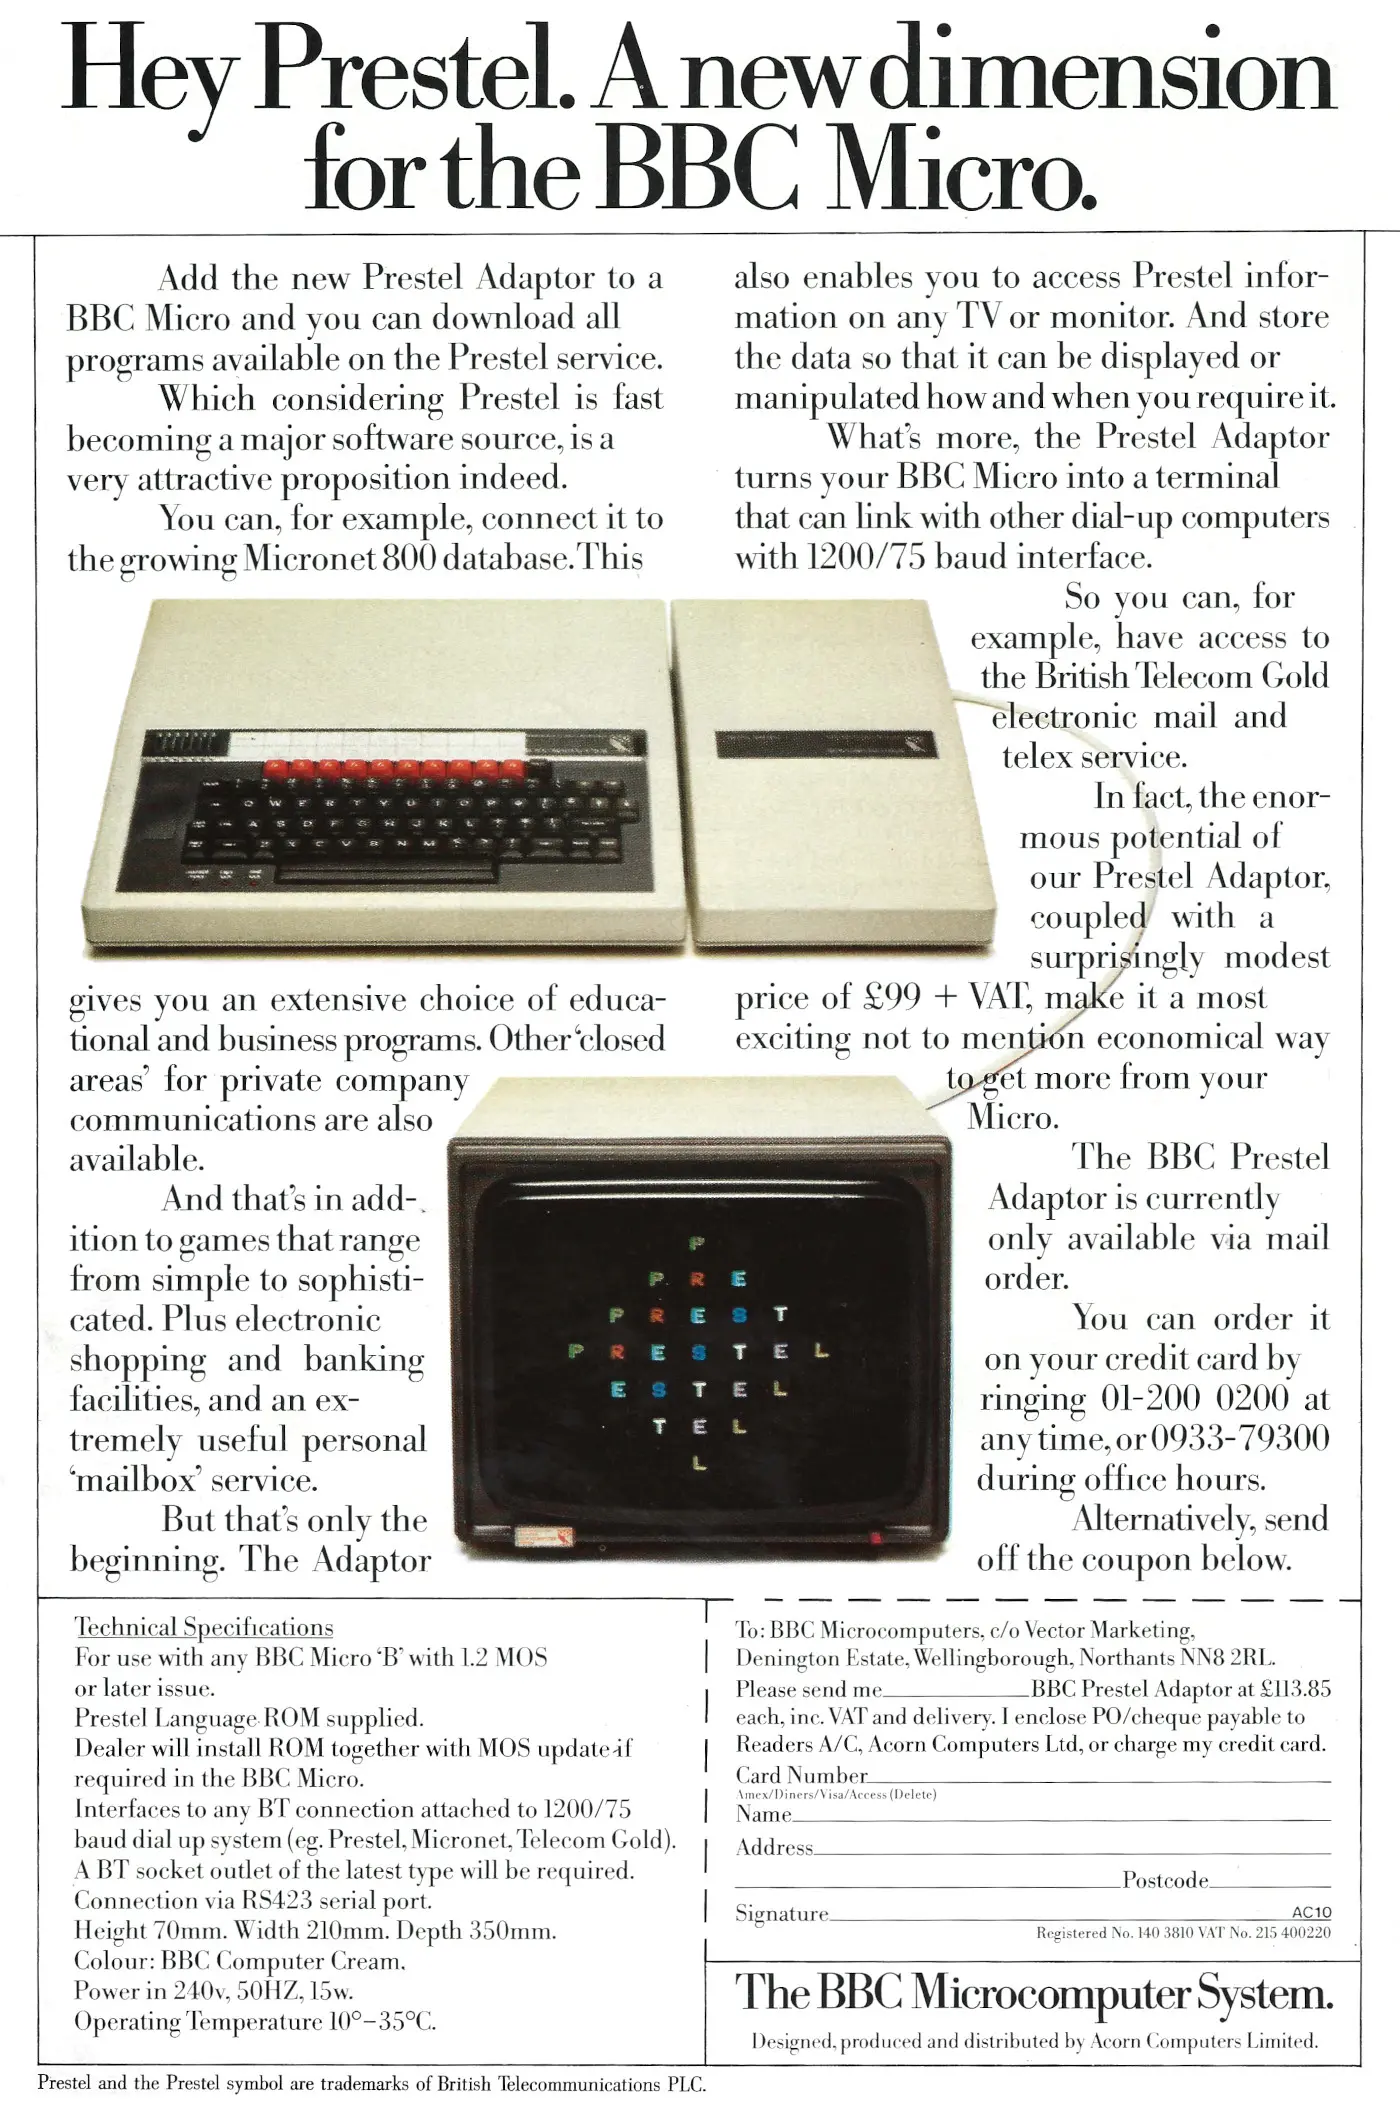 Acorn Advert: Hey Prestel.  A new dimension for the BBC Micro, from The Micro User, September 1984